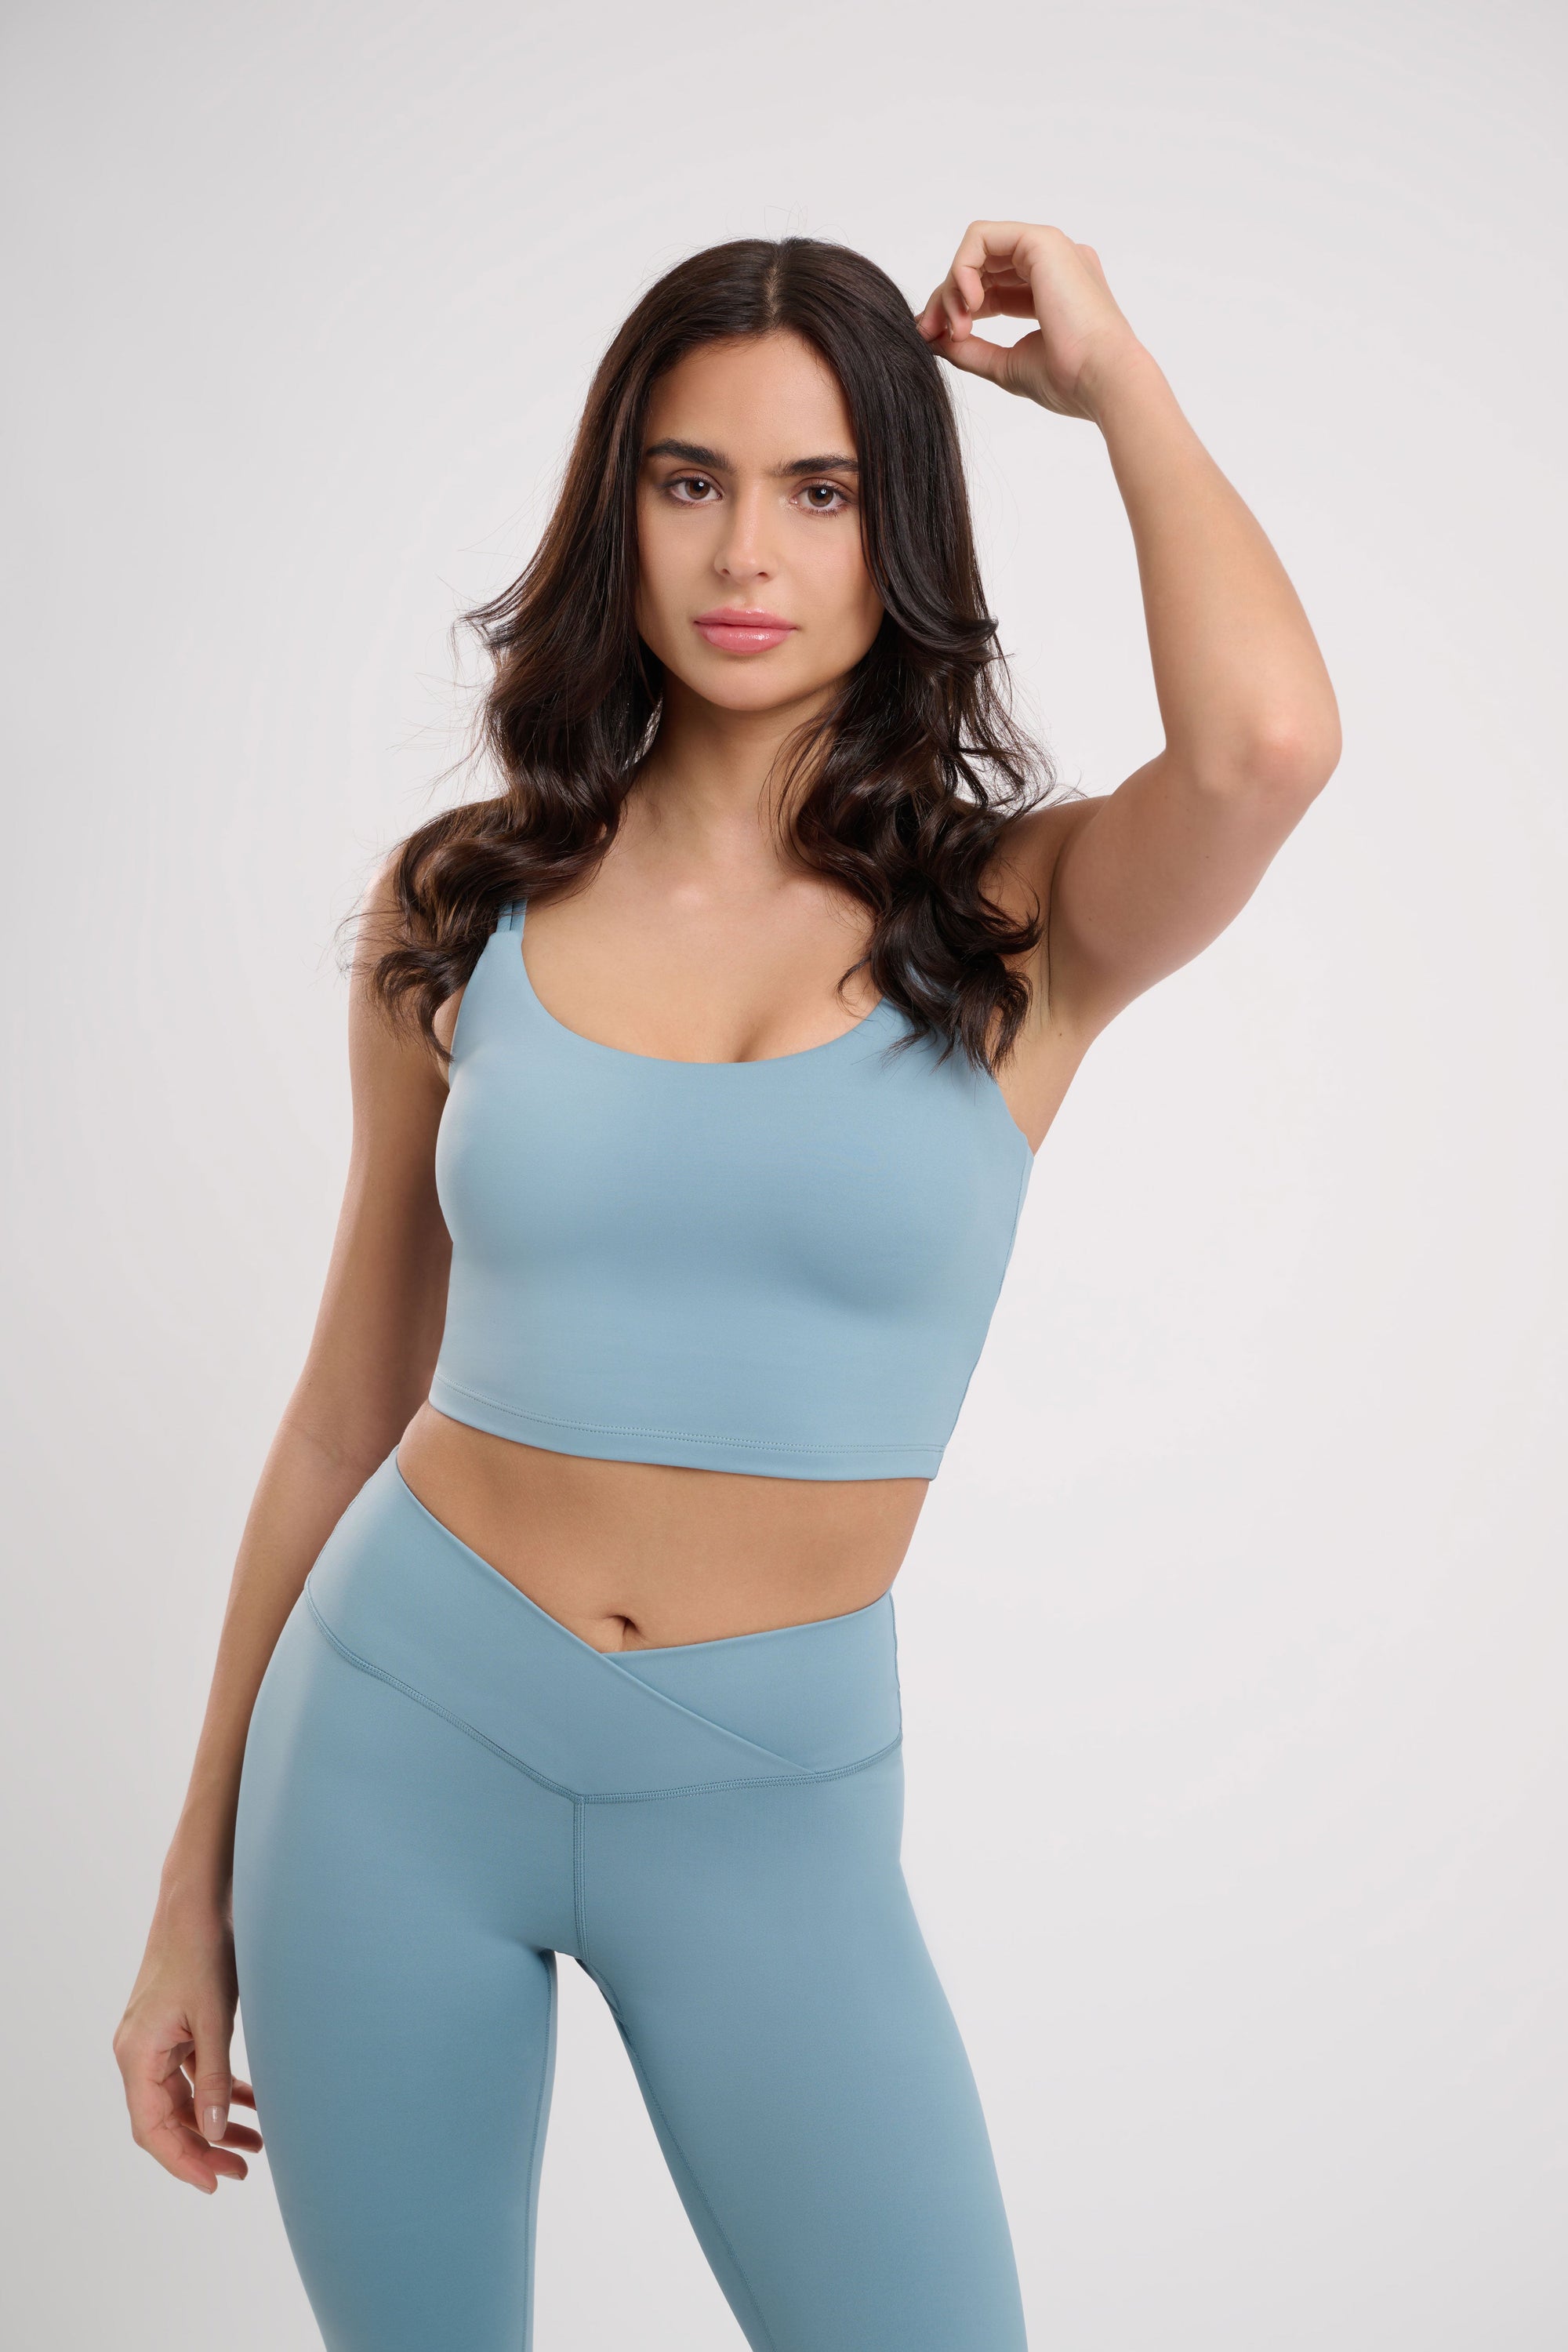 blue womens yoga crop top by naturally evie being modelled